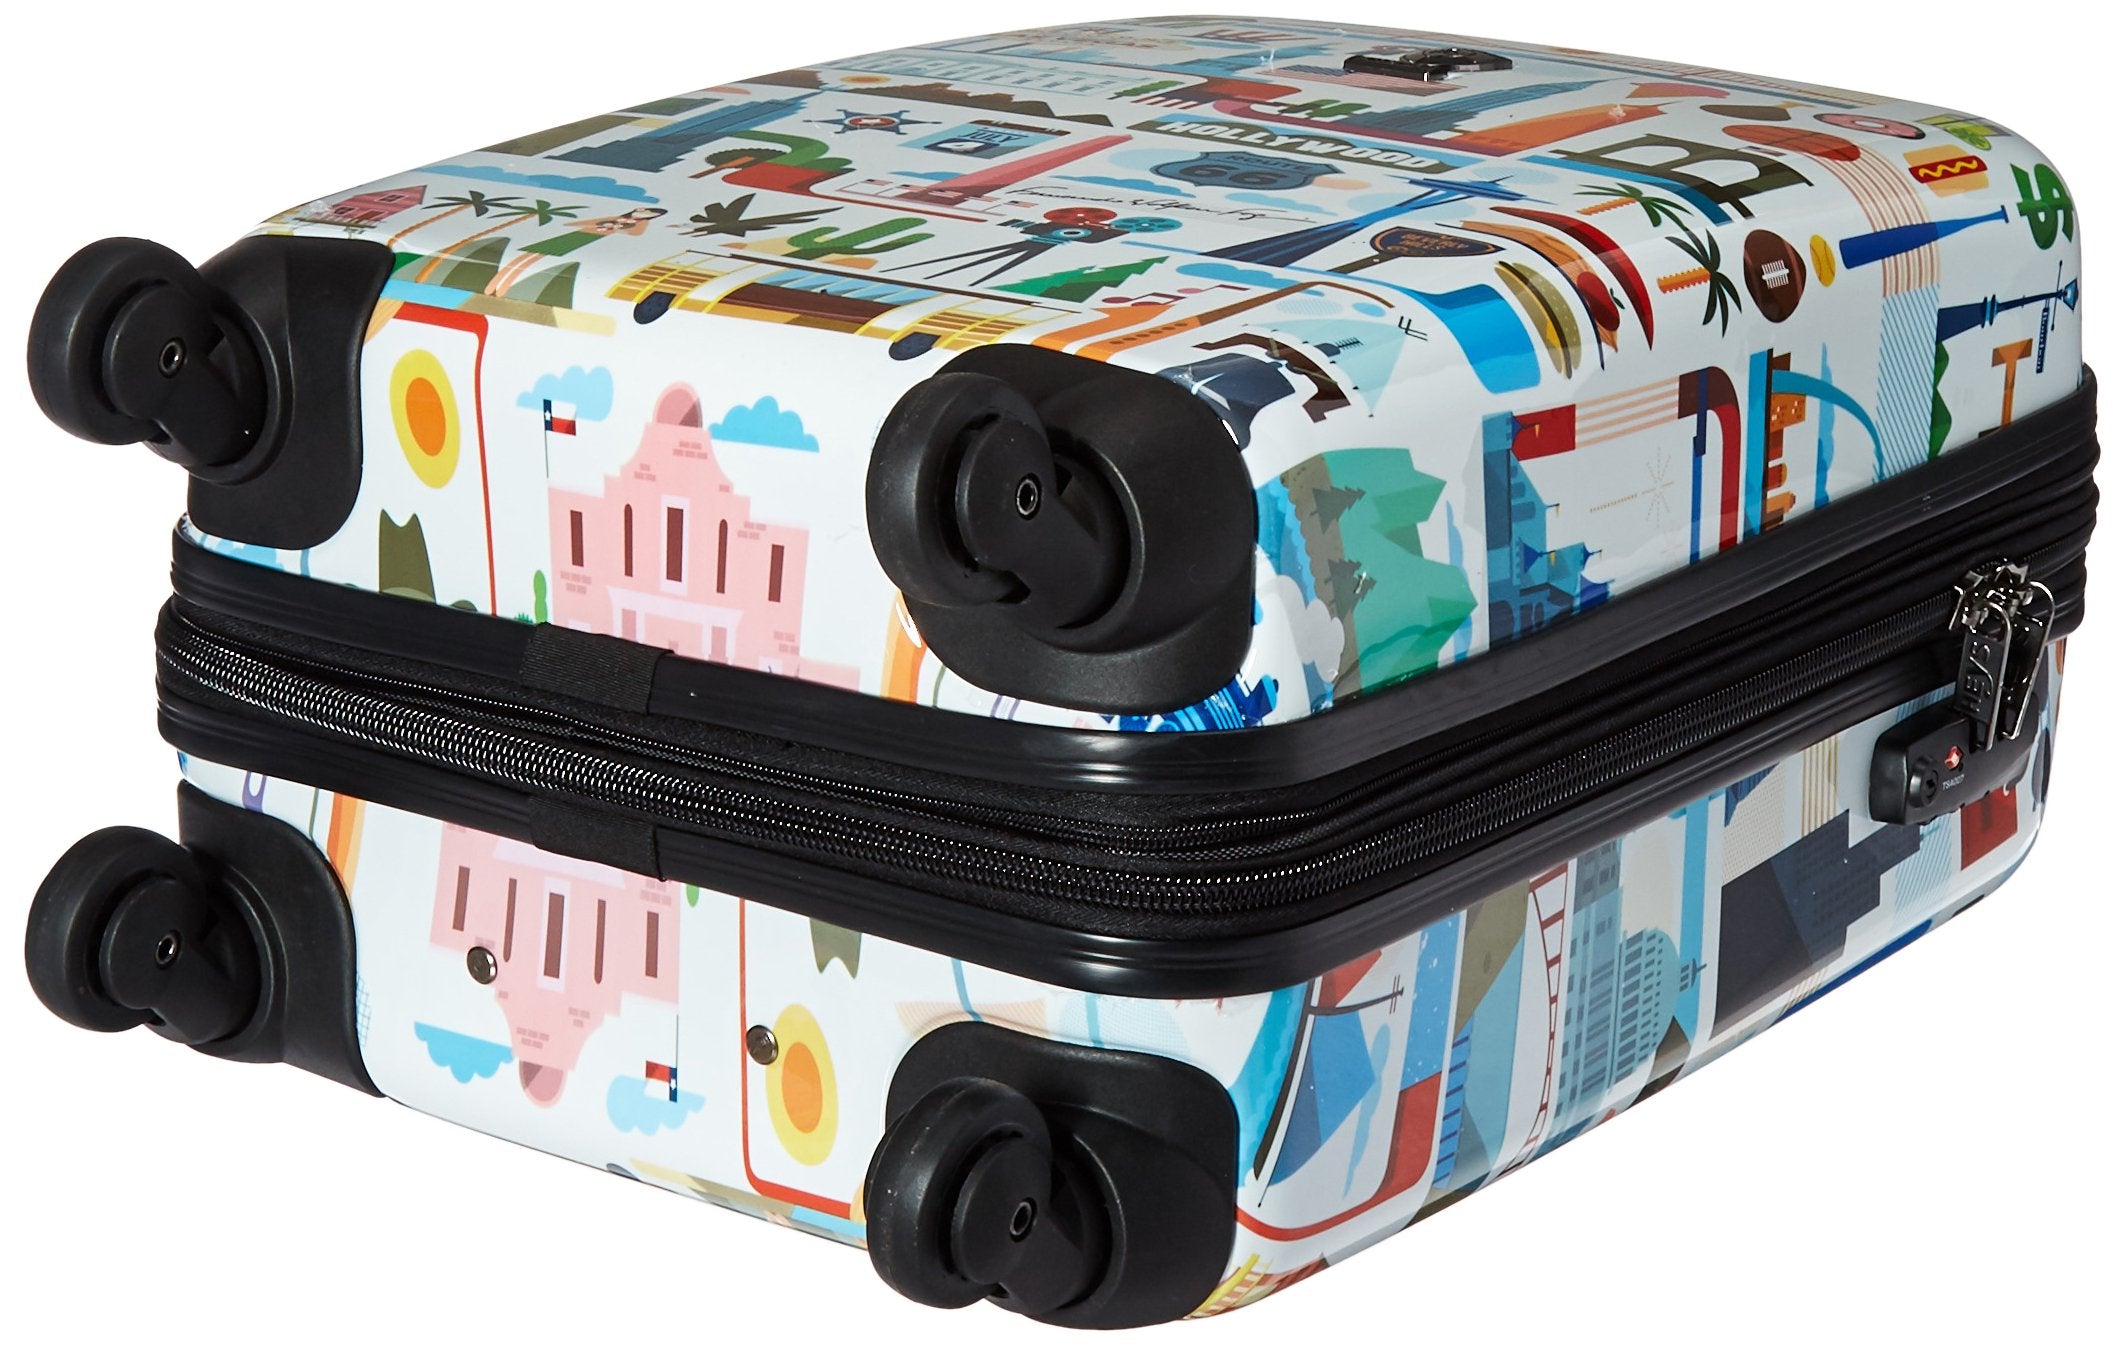 Heys America Multi -Britto A New Day 21-Inch Carry-On Spinner Luggage